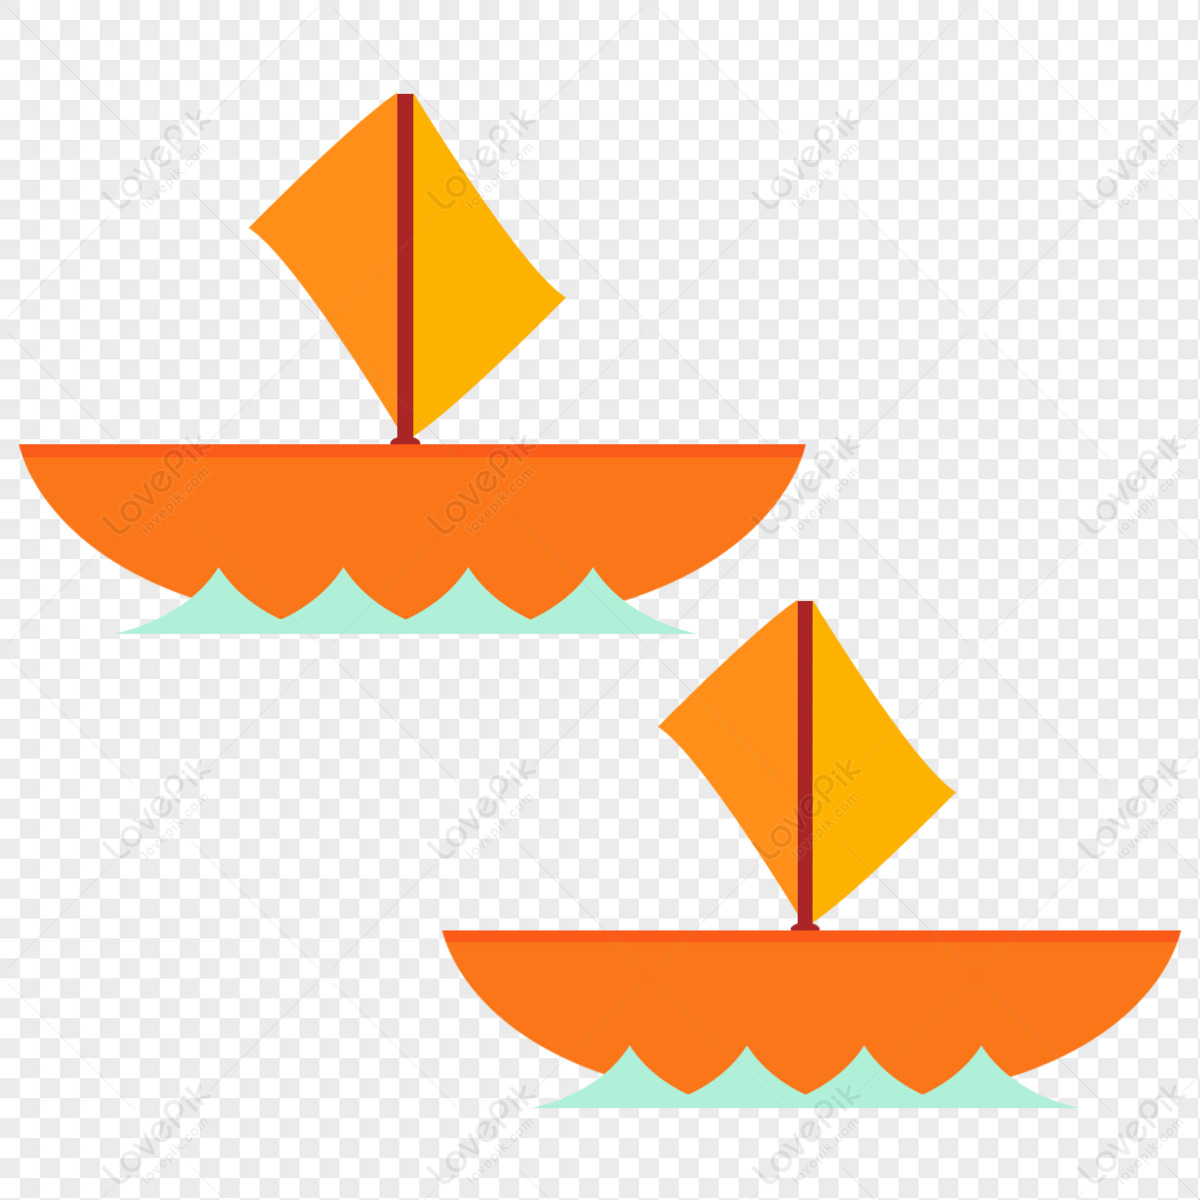 Simple Boat Cartoon Drawing Free PNG And Clipart Image For Free Download -  Lovepik | 401138159